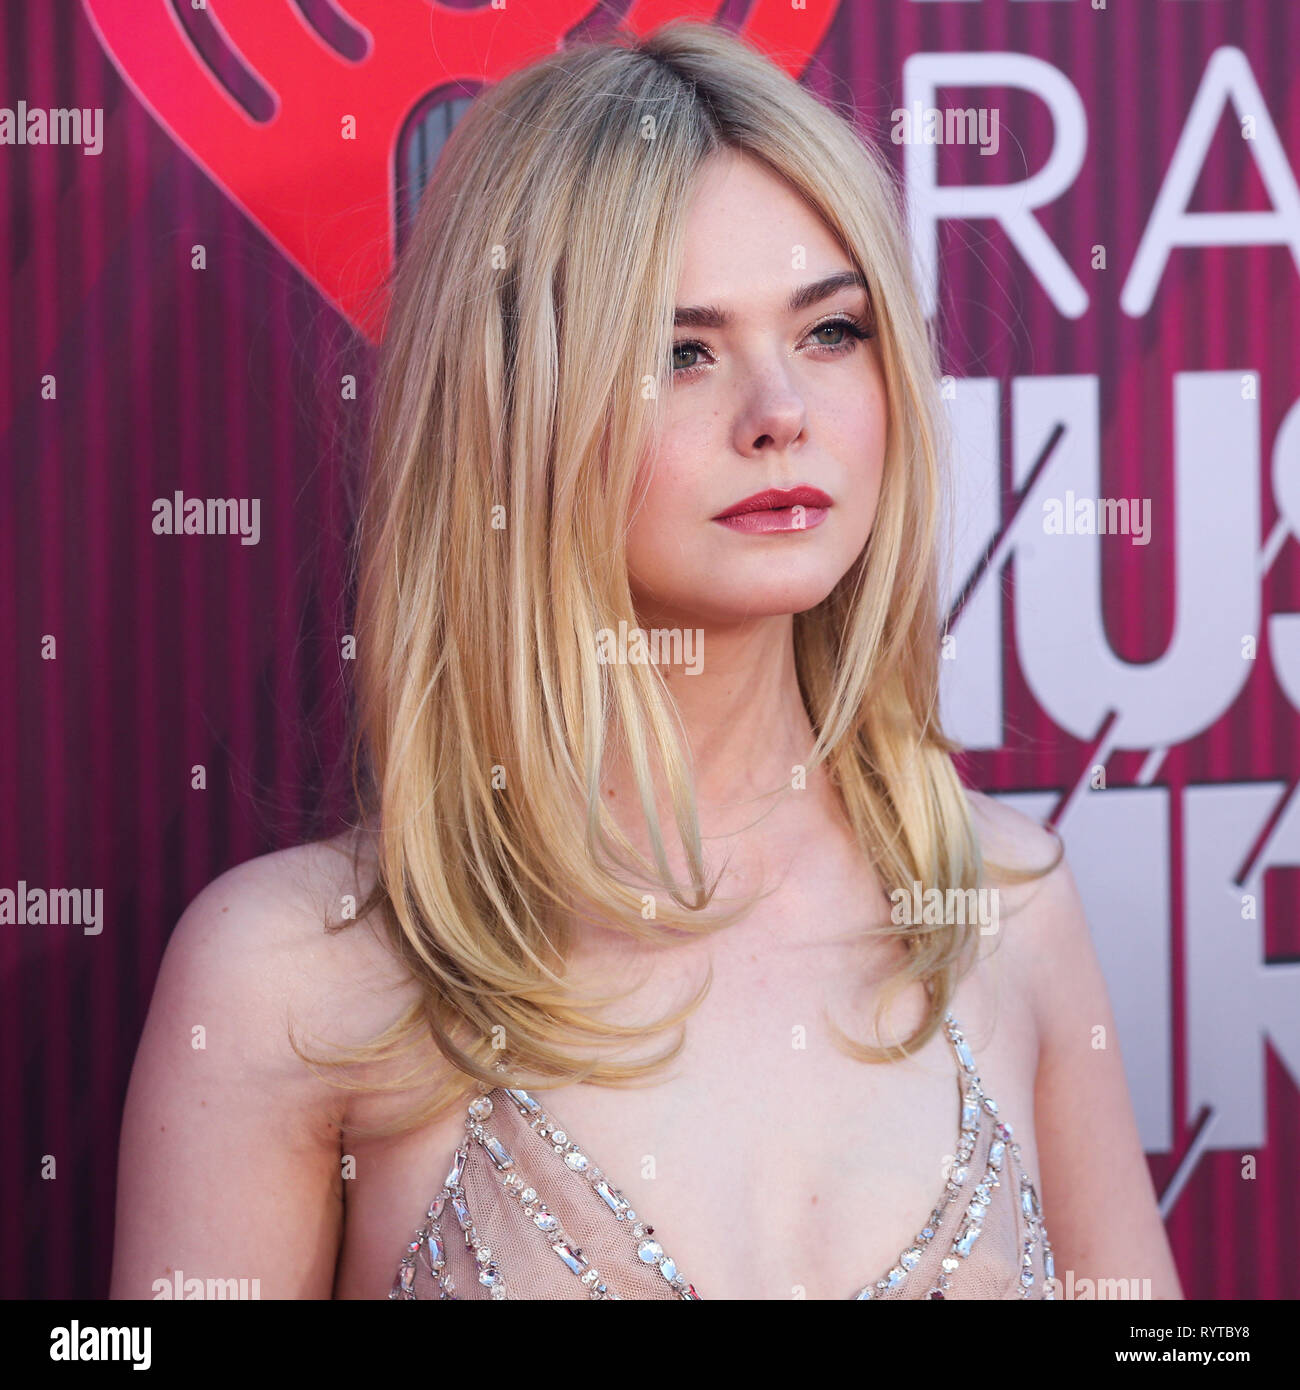 LOS ANGELES, CA, USA - MARCH 14: Actress Elle Fanning wearing a Miu Miu gown and Tiffany jewels arrives at the 2019 iHeartRadio Music Awards held at Microsoft Theater at L.A. Live on March 14, 2019 in Los Angeles, California, United States. (Photo by Xavier Collin/Image Press Agency) Stock Photo